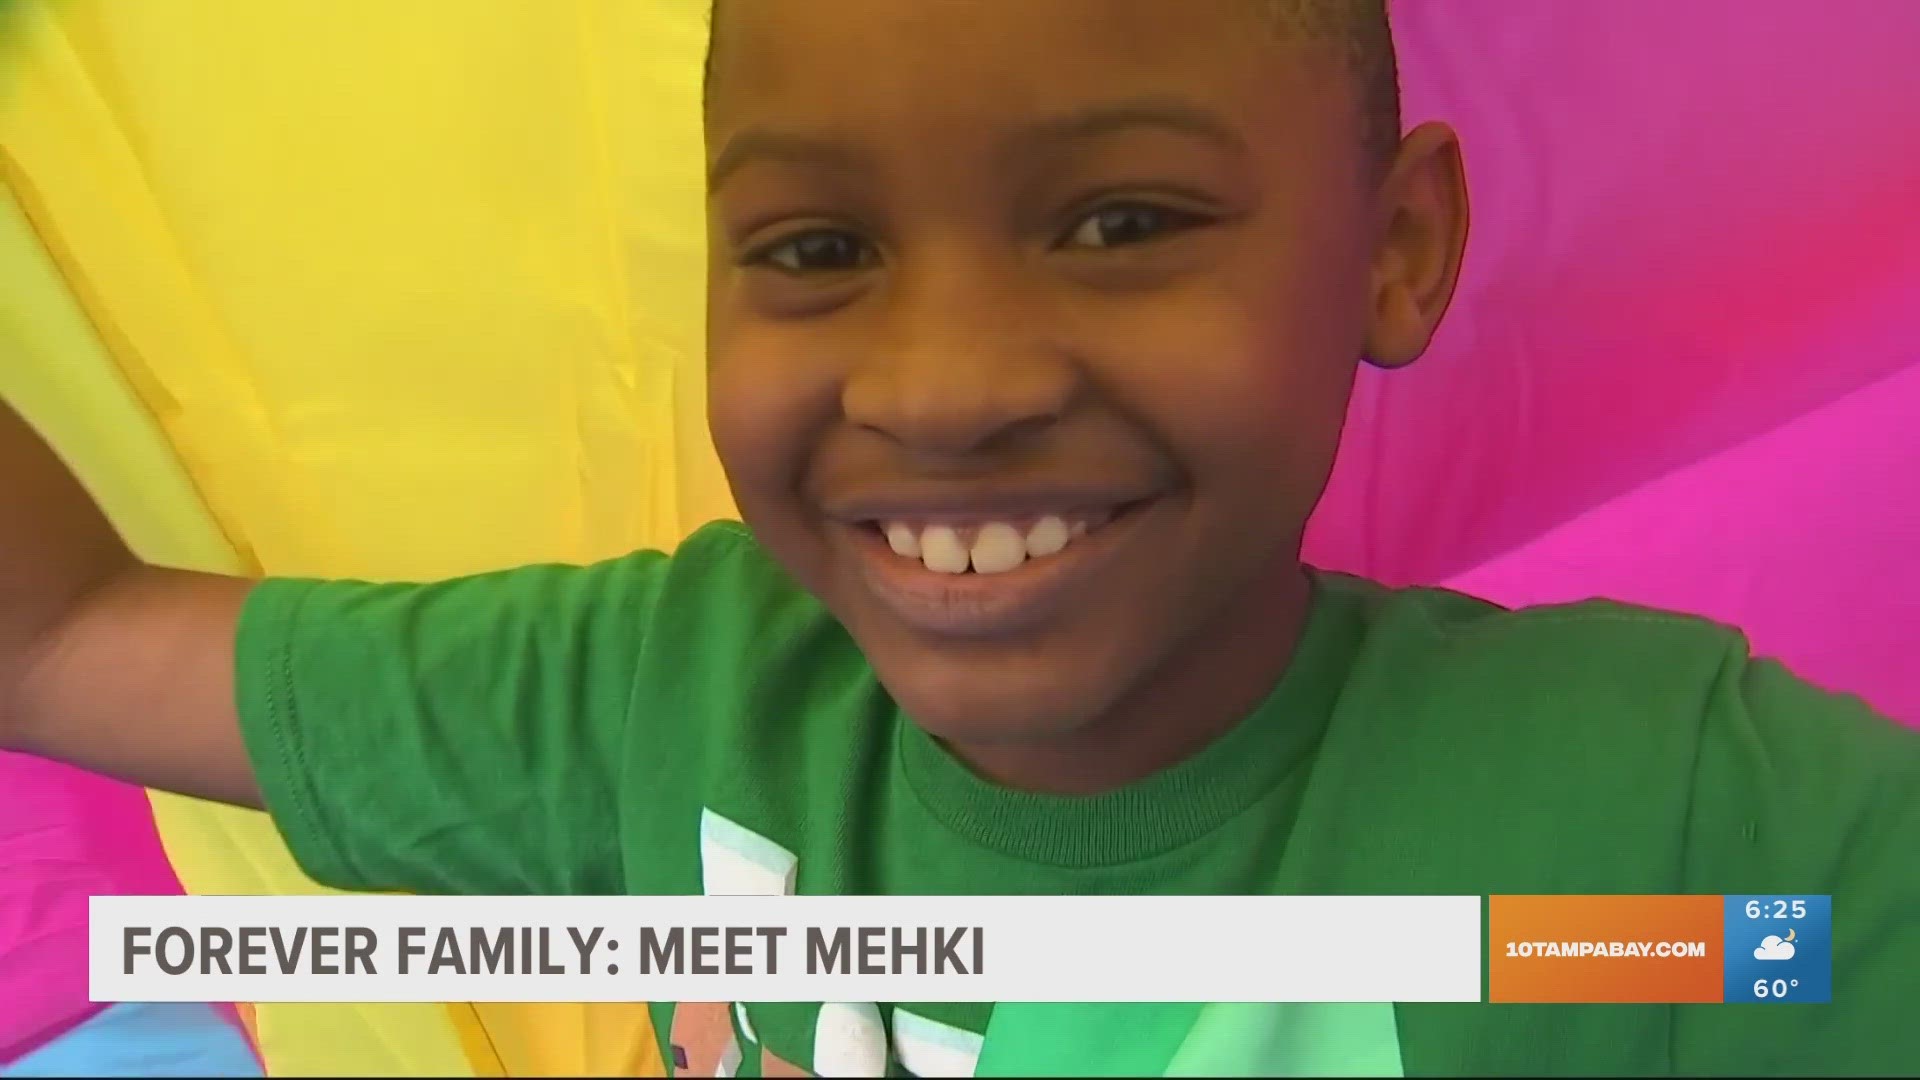 Mehki is a second-grader who wants to grow up to be a scientist.